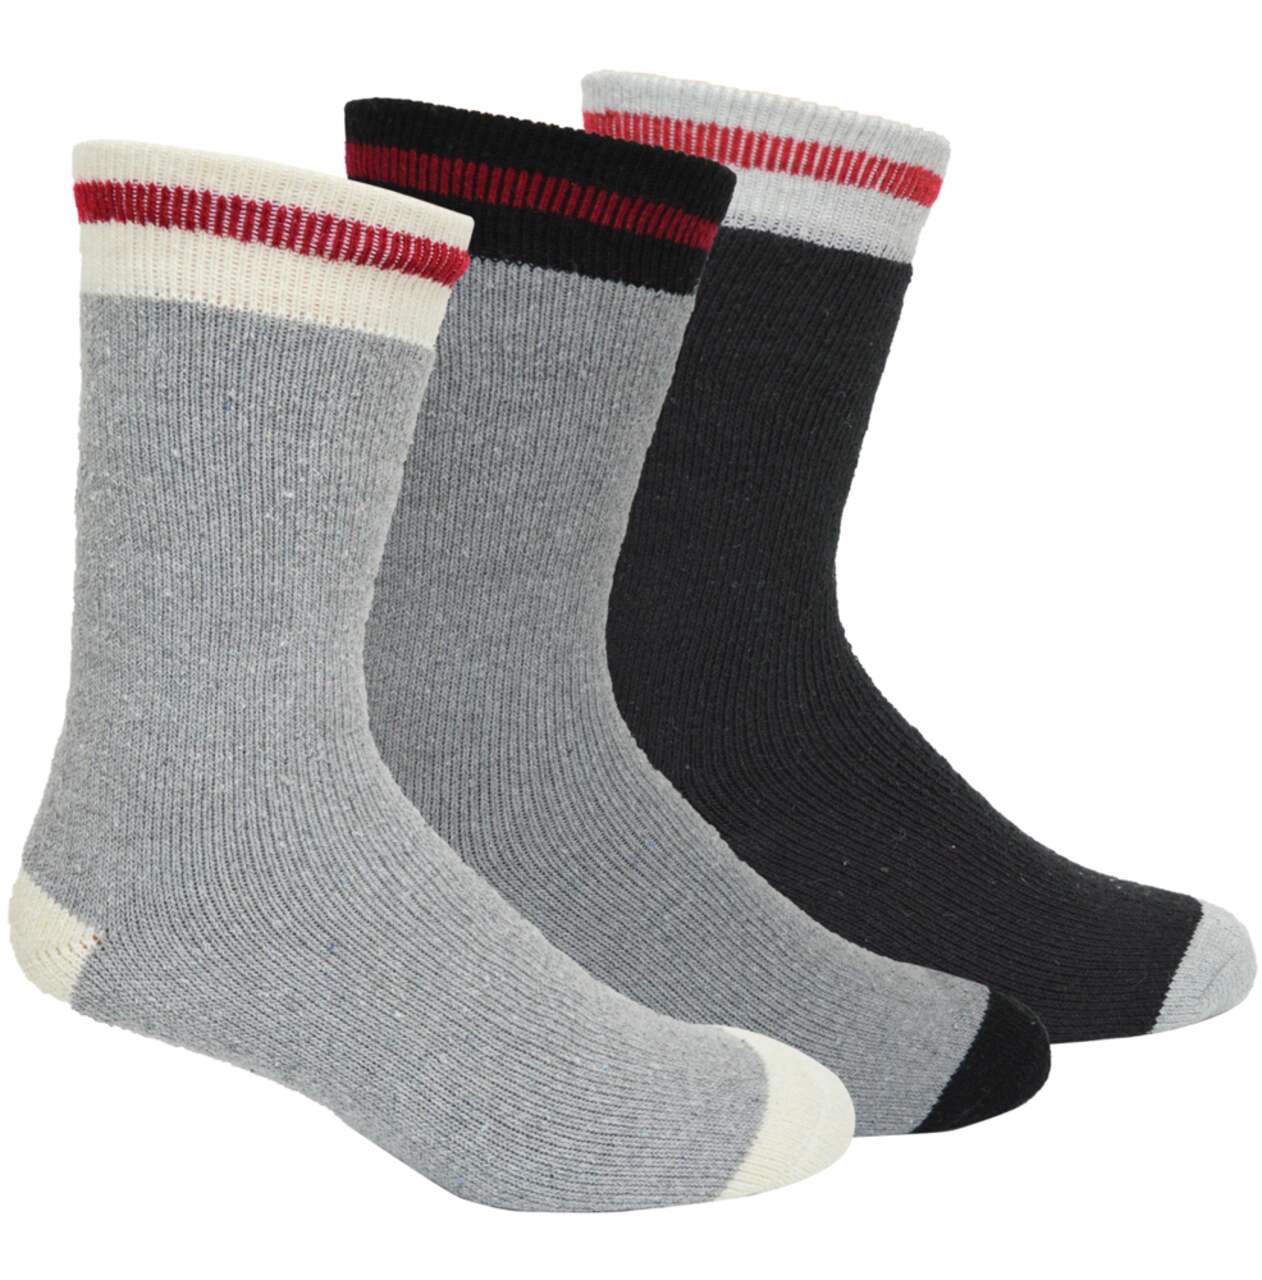 https://media-www.canadiantire.ca/product/playing/footwear-apparel/footwear-apparel-accessories/1873161/kodiak-mens-thermal-cotton-socks-3-pack-b958e22e-483a-48b4-be08-f985633db278.png?imdensity=1&imwidth=640&impolicy=mZoom